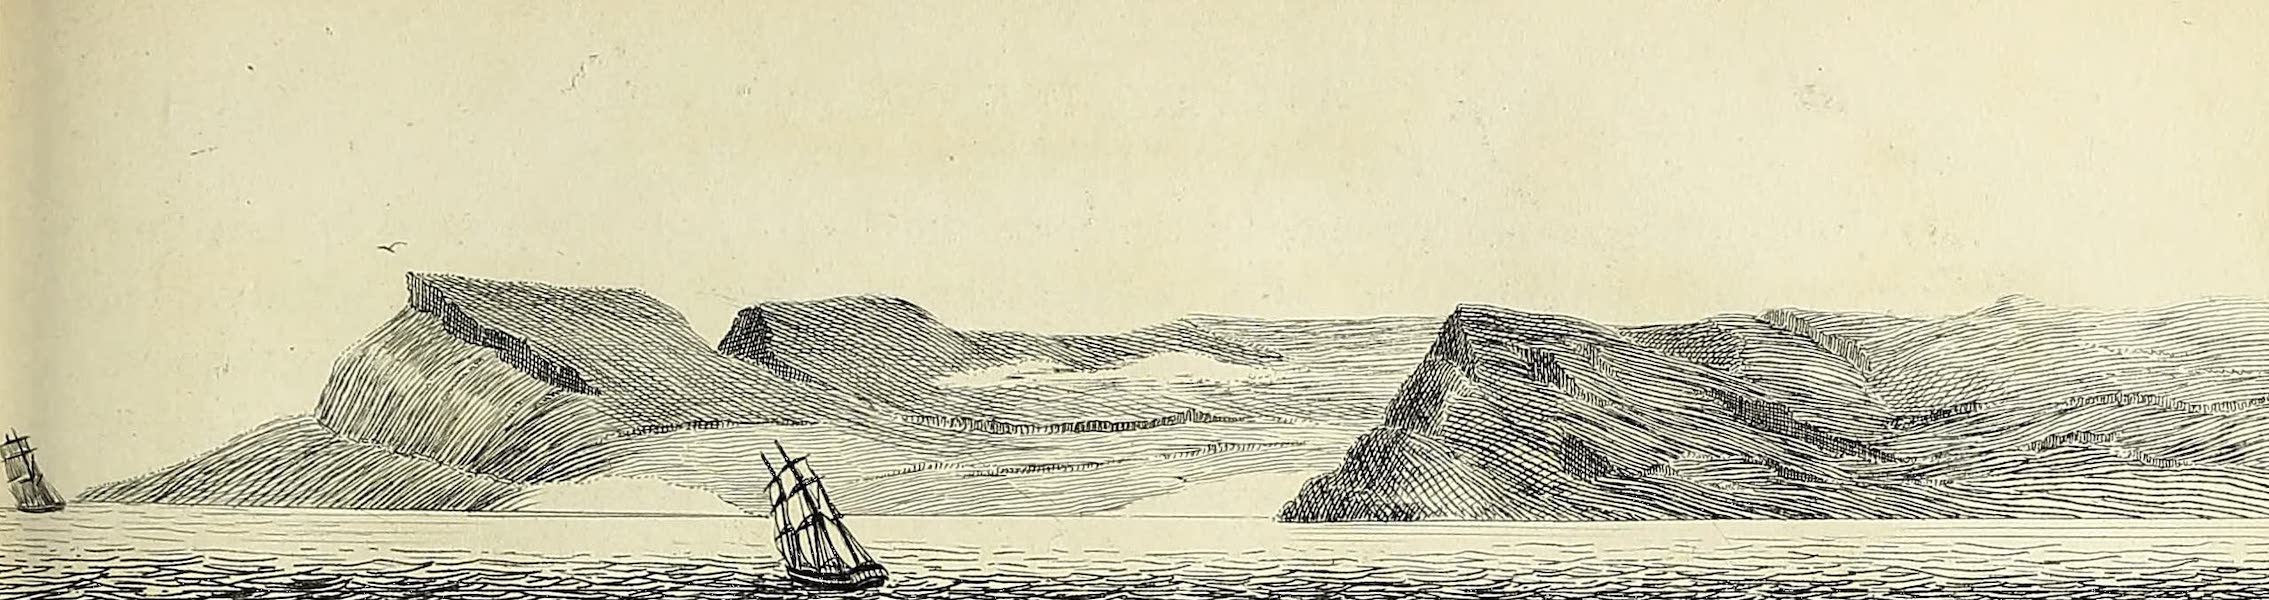 Journal of a Voyage for the Discovery of a North-West Passage - Cape Hotham, bearing W. by S. (1821)